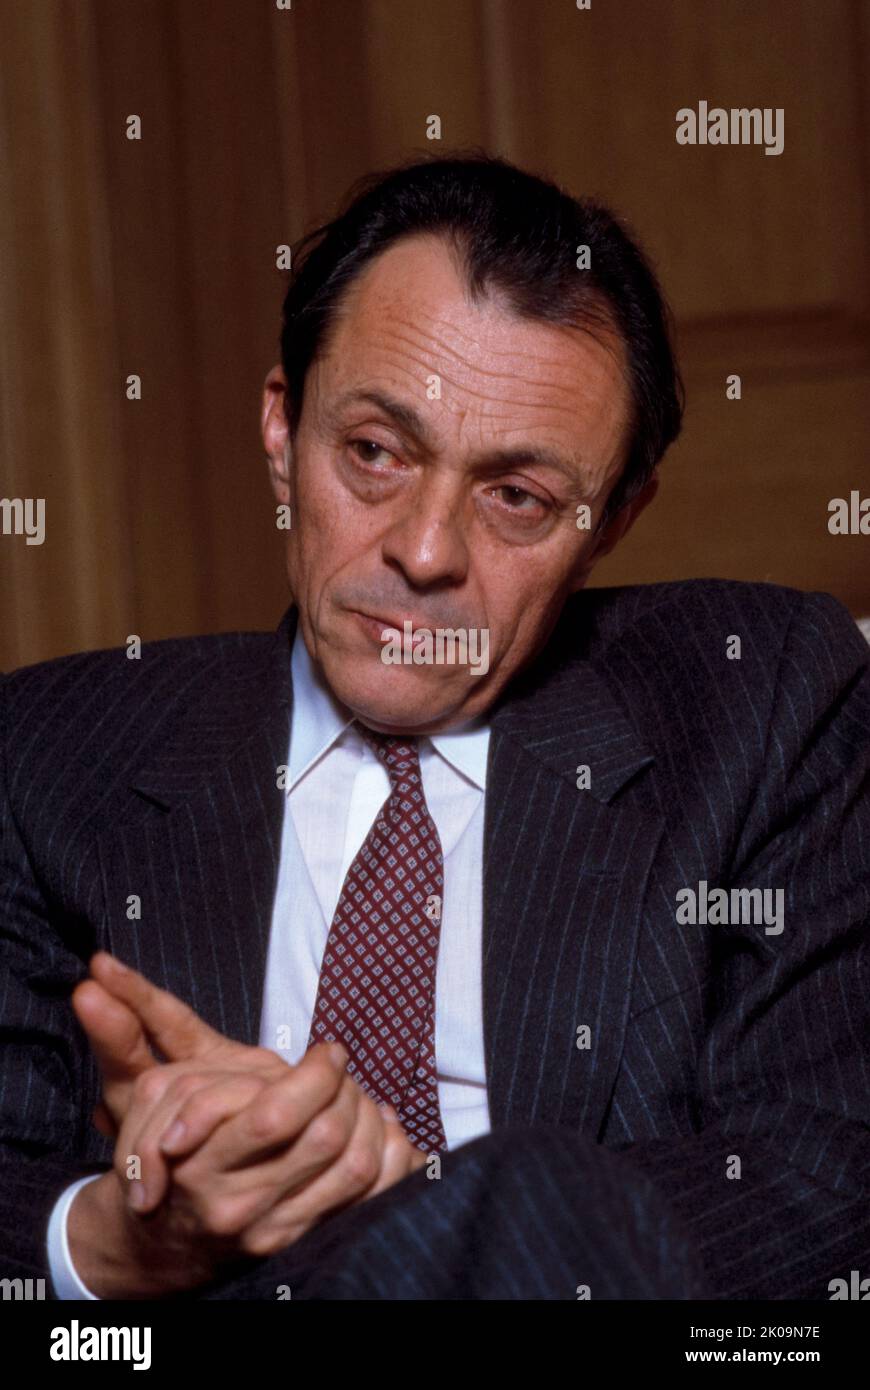 Michel Rocard (1930 - 2016) French politician and a member of the Socialist Party (PS). He served as Prime Minister under Francois Mitterrand from 1988 to 1991, during which he created the Revenu minimum d'insertion (RMI), a social minimum welfare program for indigents, and achieved the Matignon Accords regarding the status of New Caledonia. He was a member of the European Parliament, and was strongly involved in European policies until 2009. Stock Photo